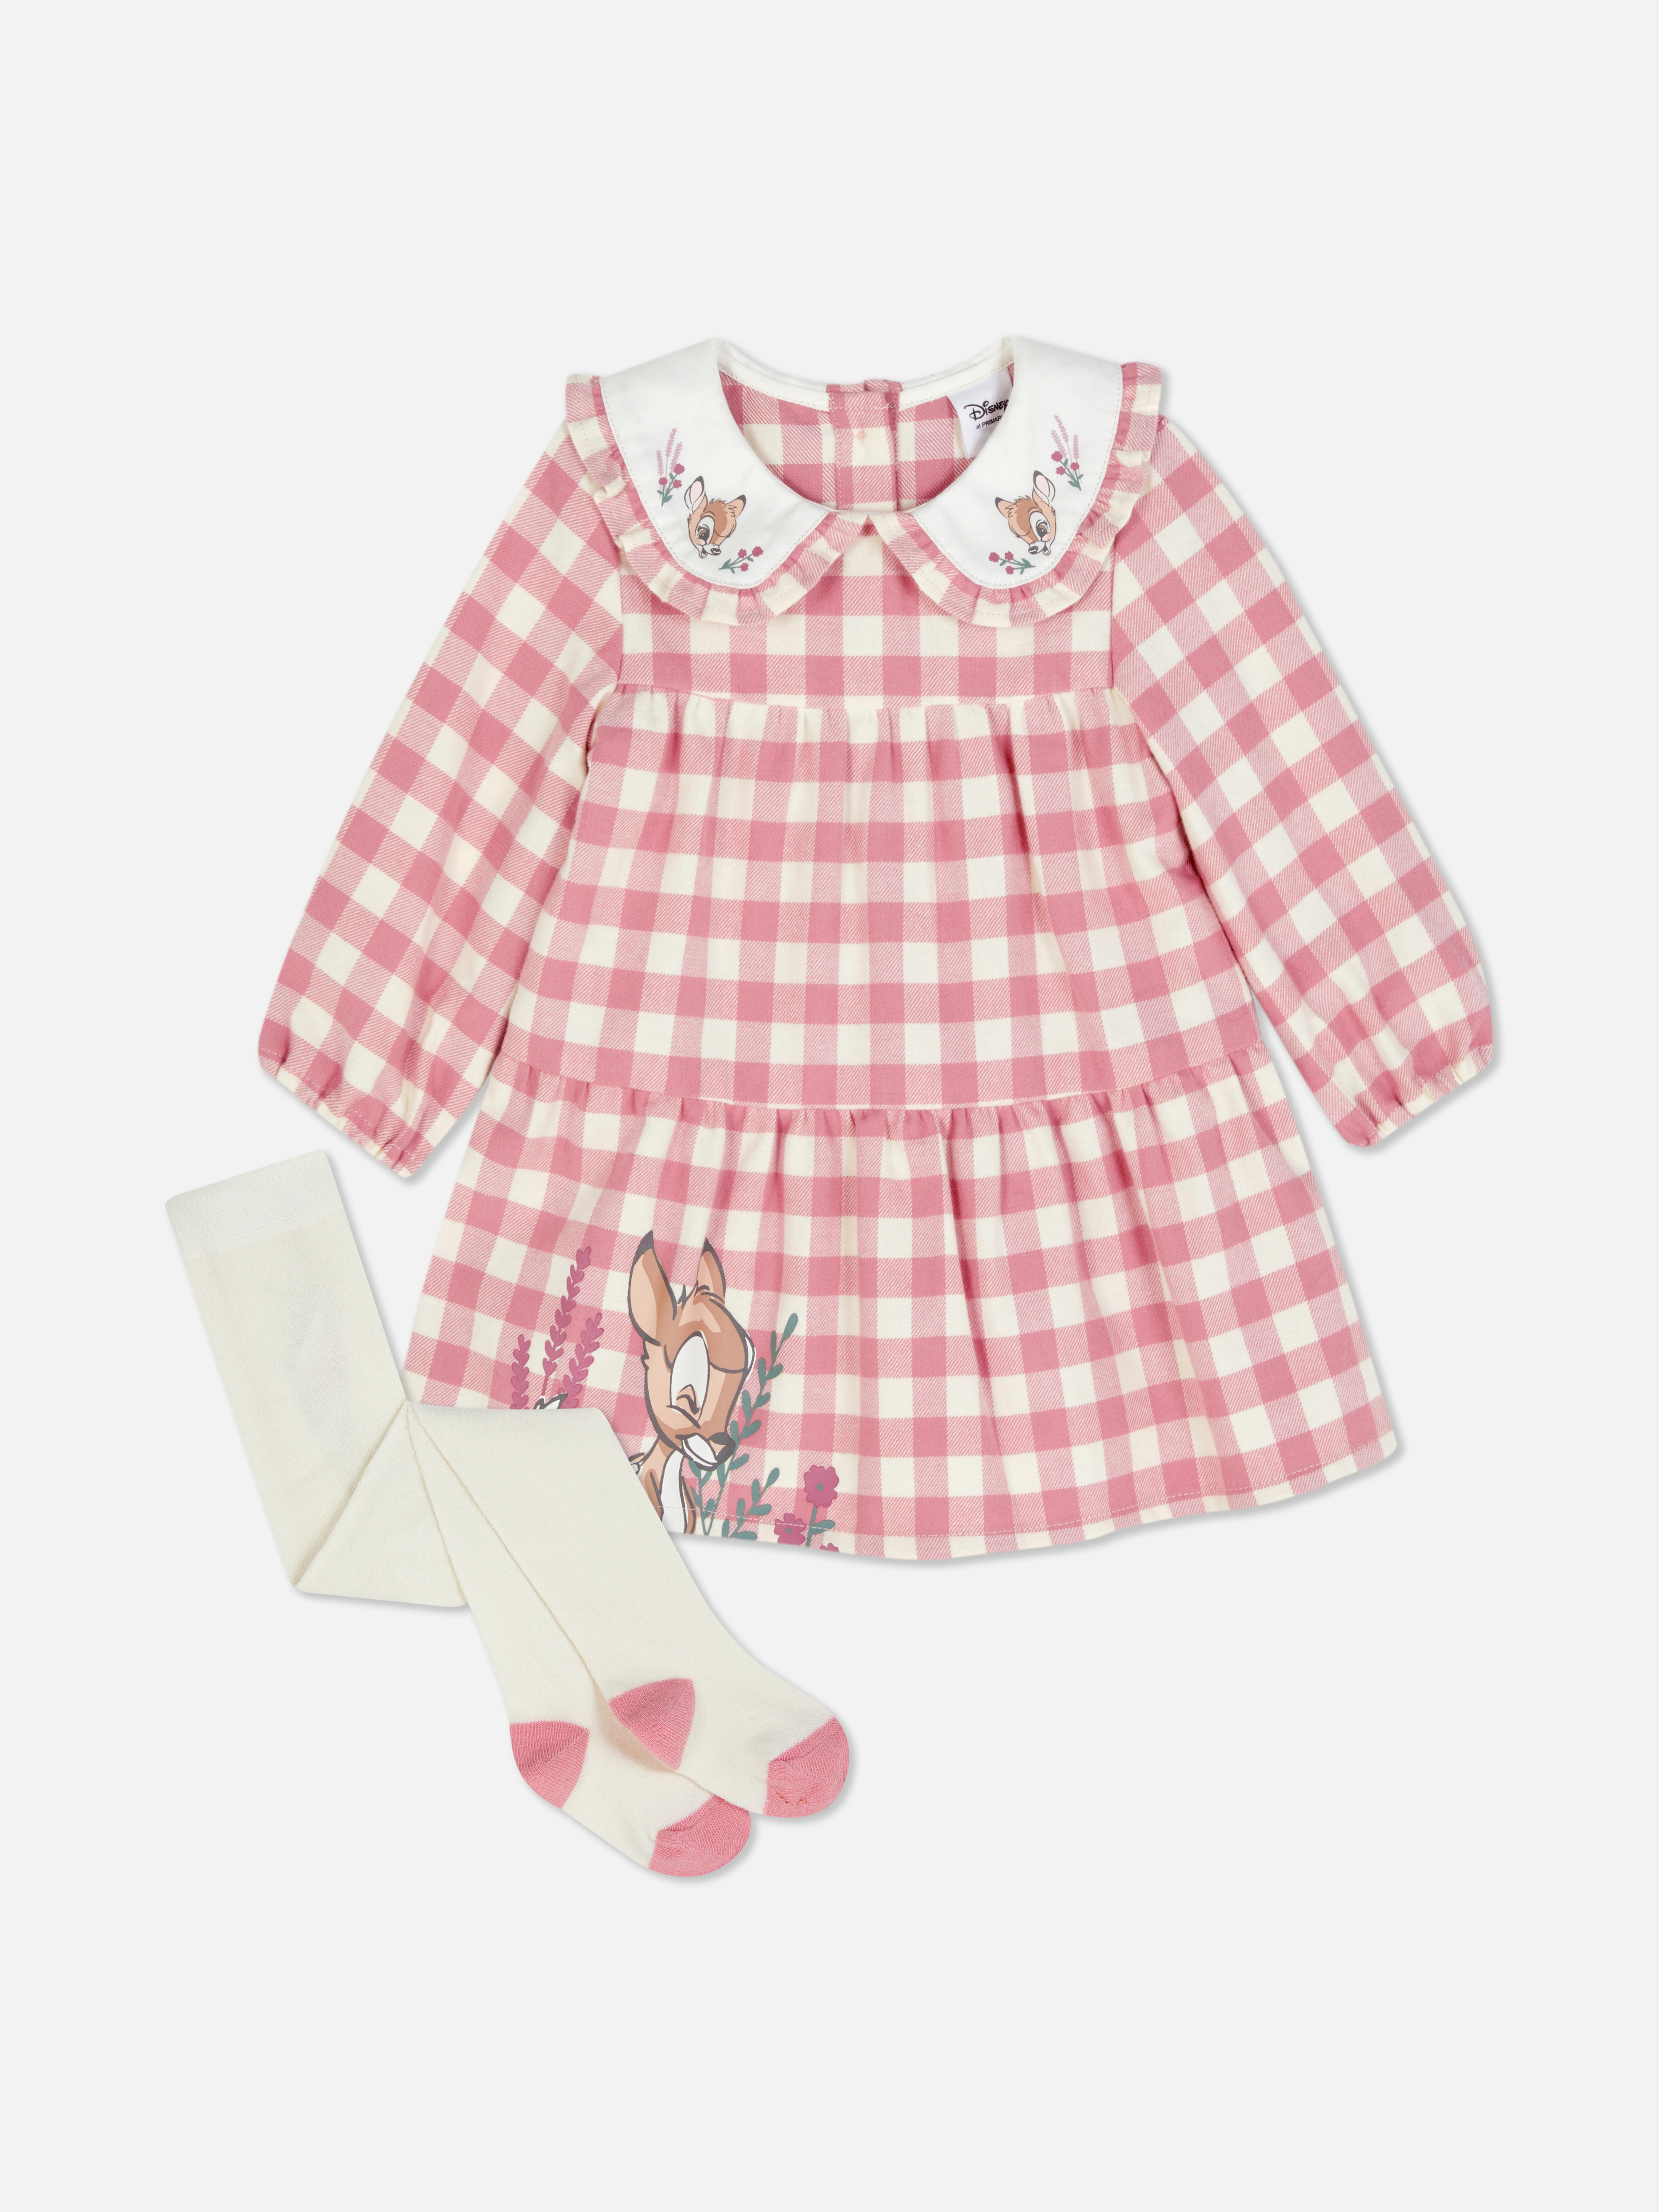 Disney’s Bambi Gingham Dress and Tights Set